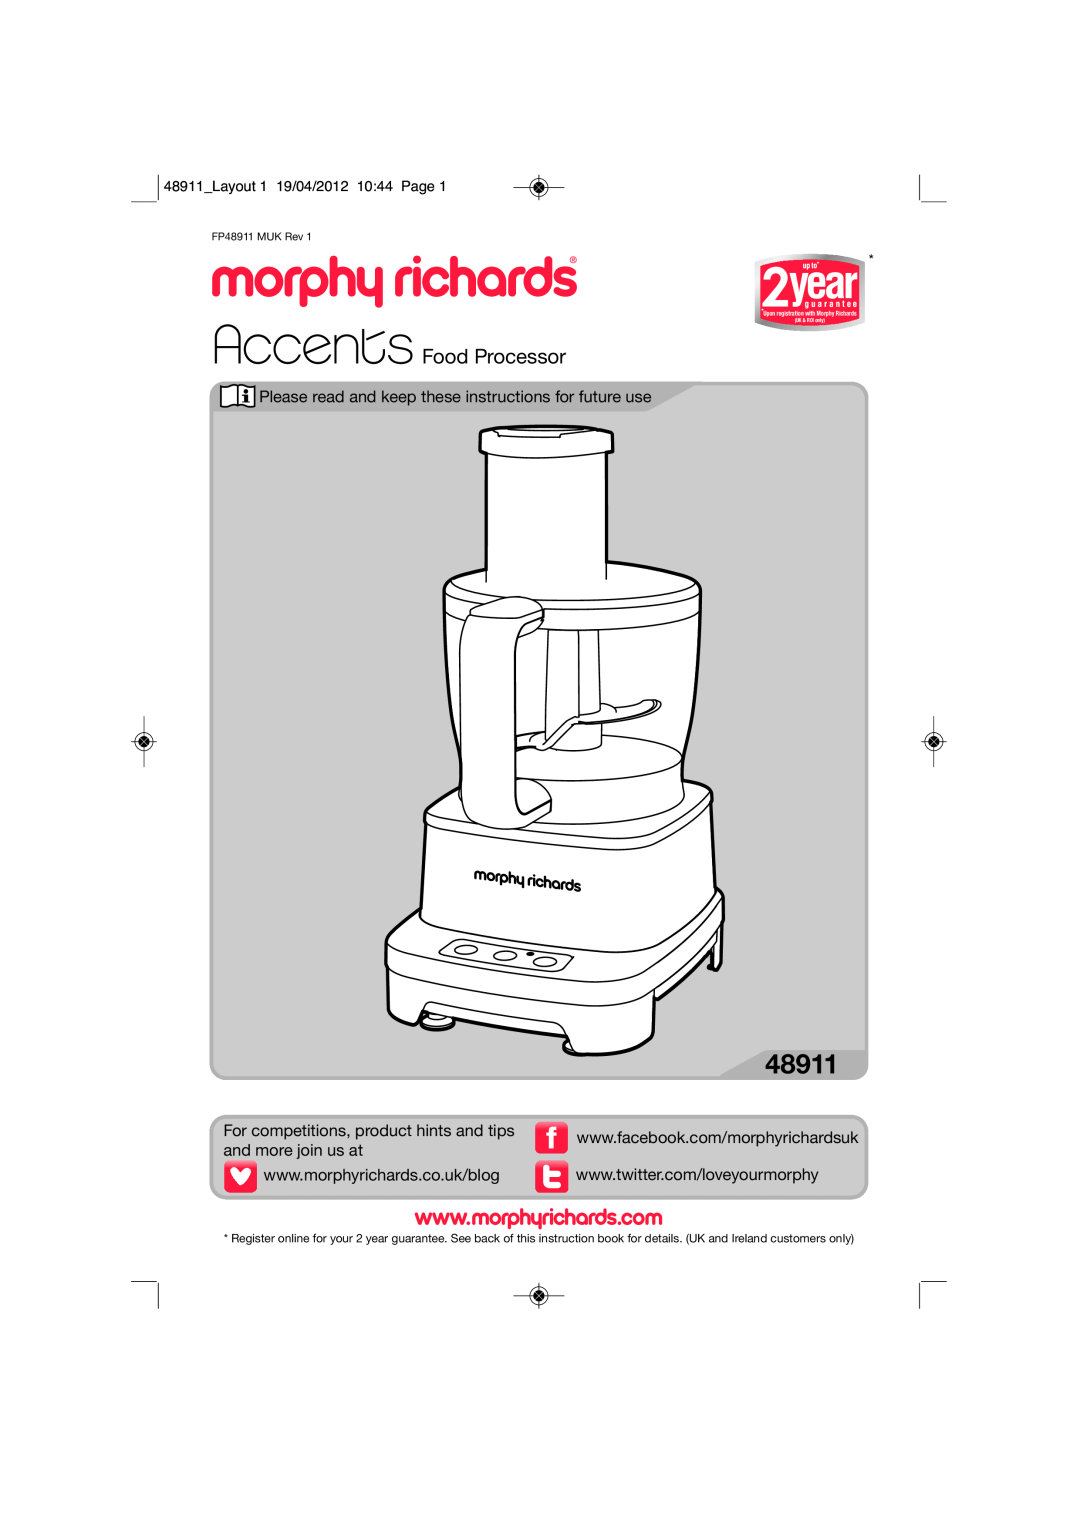 Morphy Richards manual 48911Layout 1 19/04/2012 1044 Page, Food Processor, For competitions, product hints and tips 